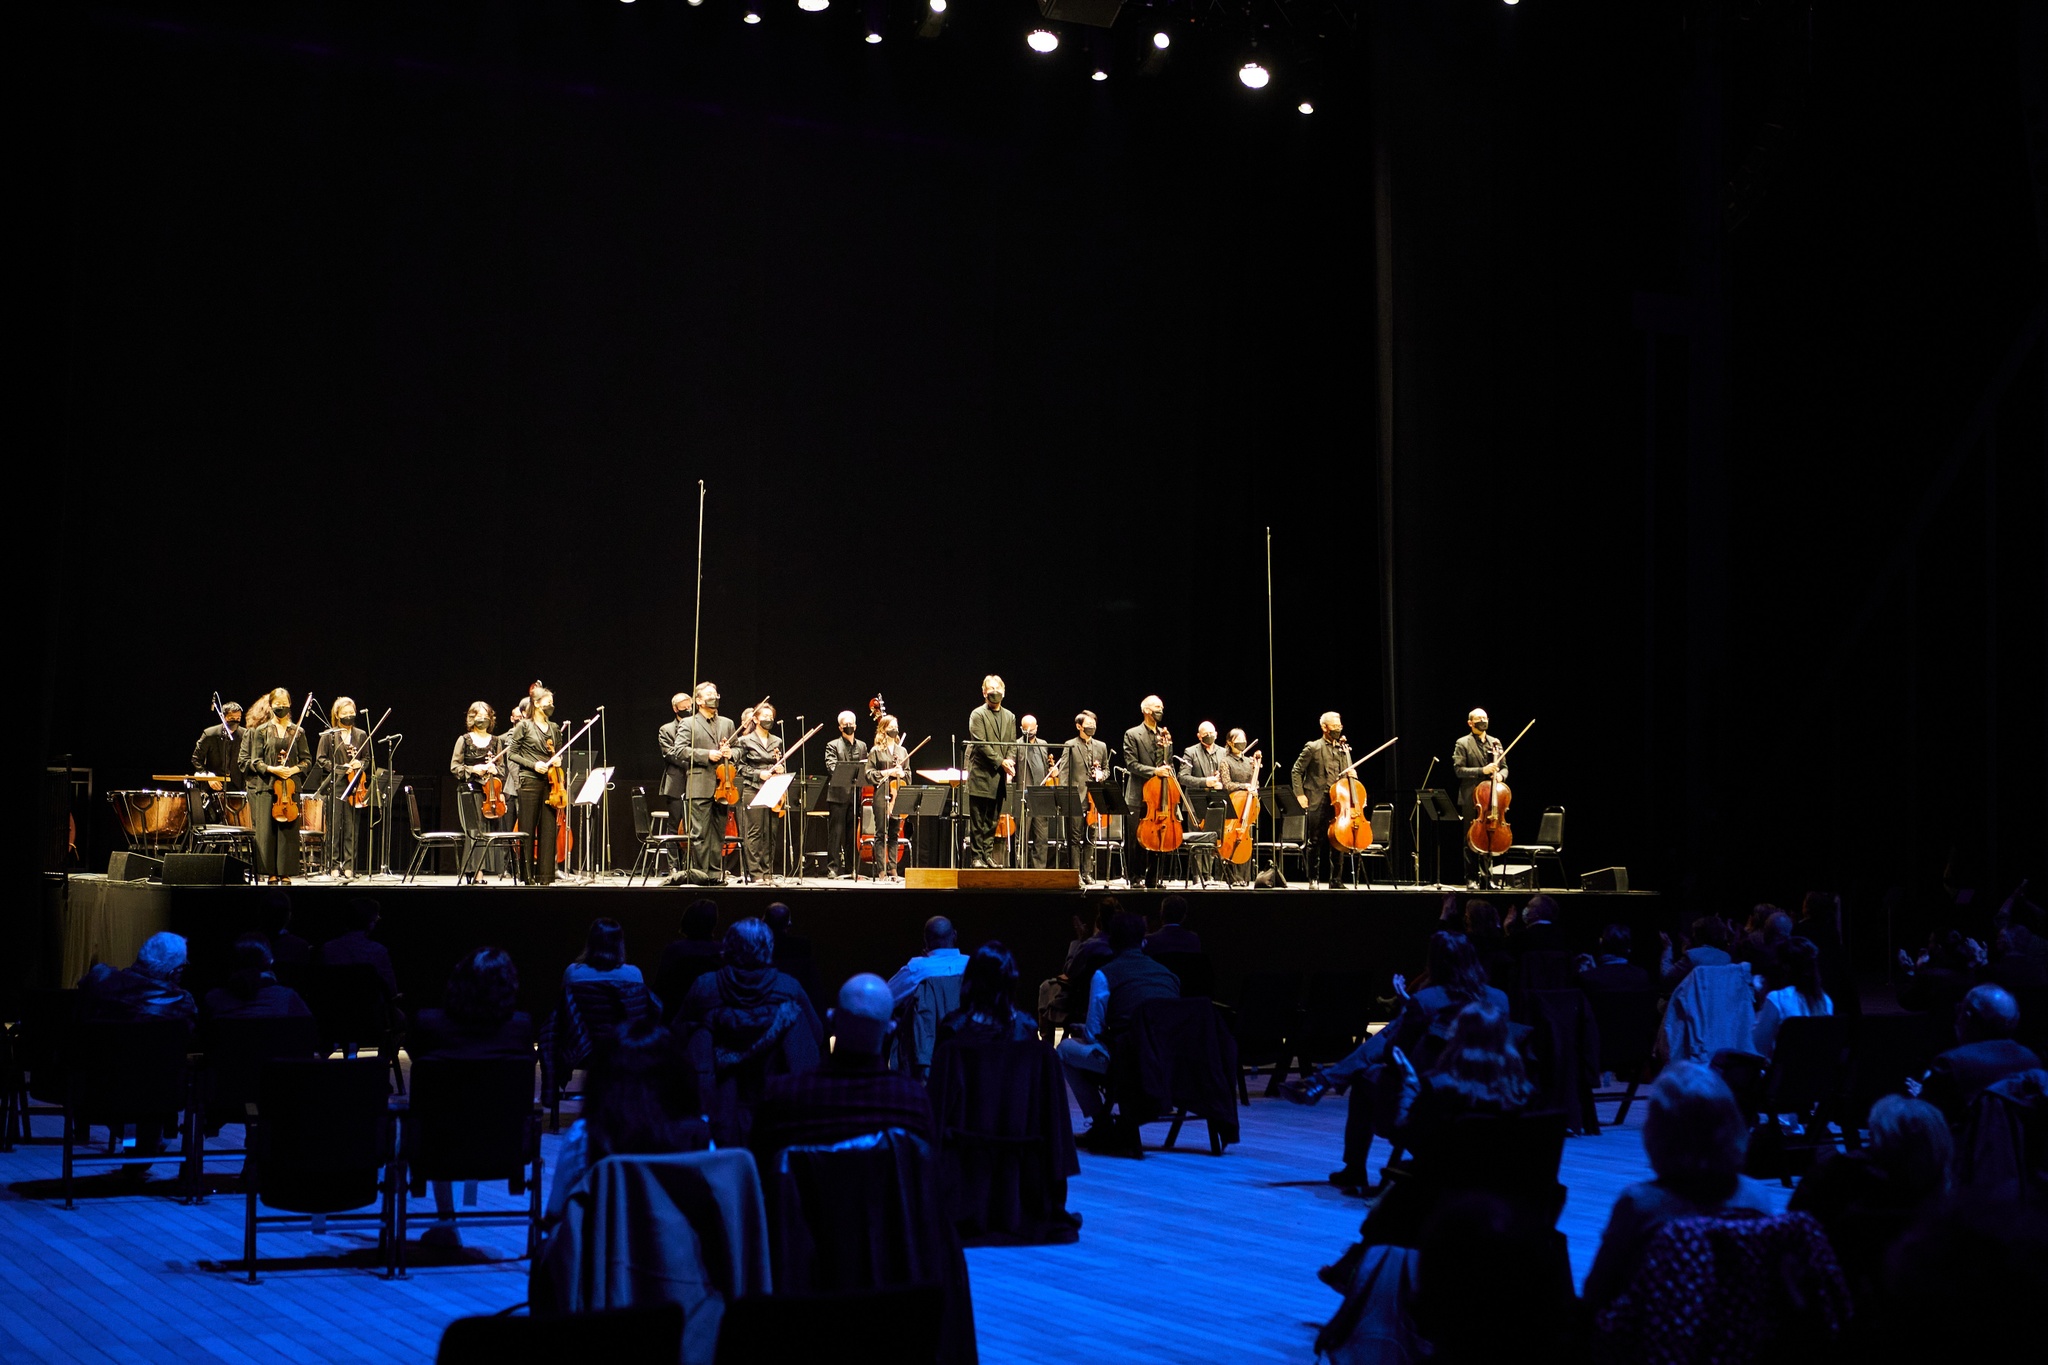 An audience seated in distanced pairs in blue shadowy light with an orchestra standing on stage illuminated in the background